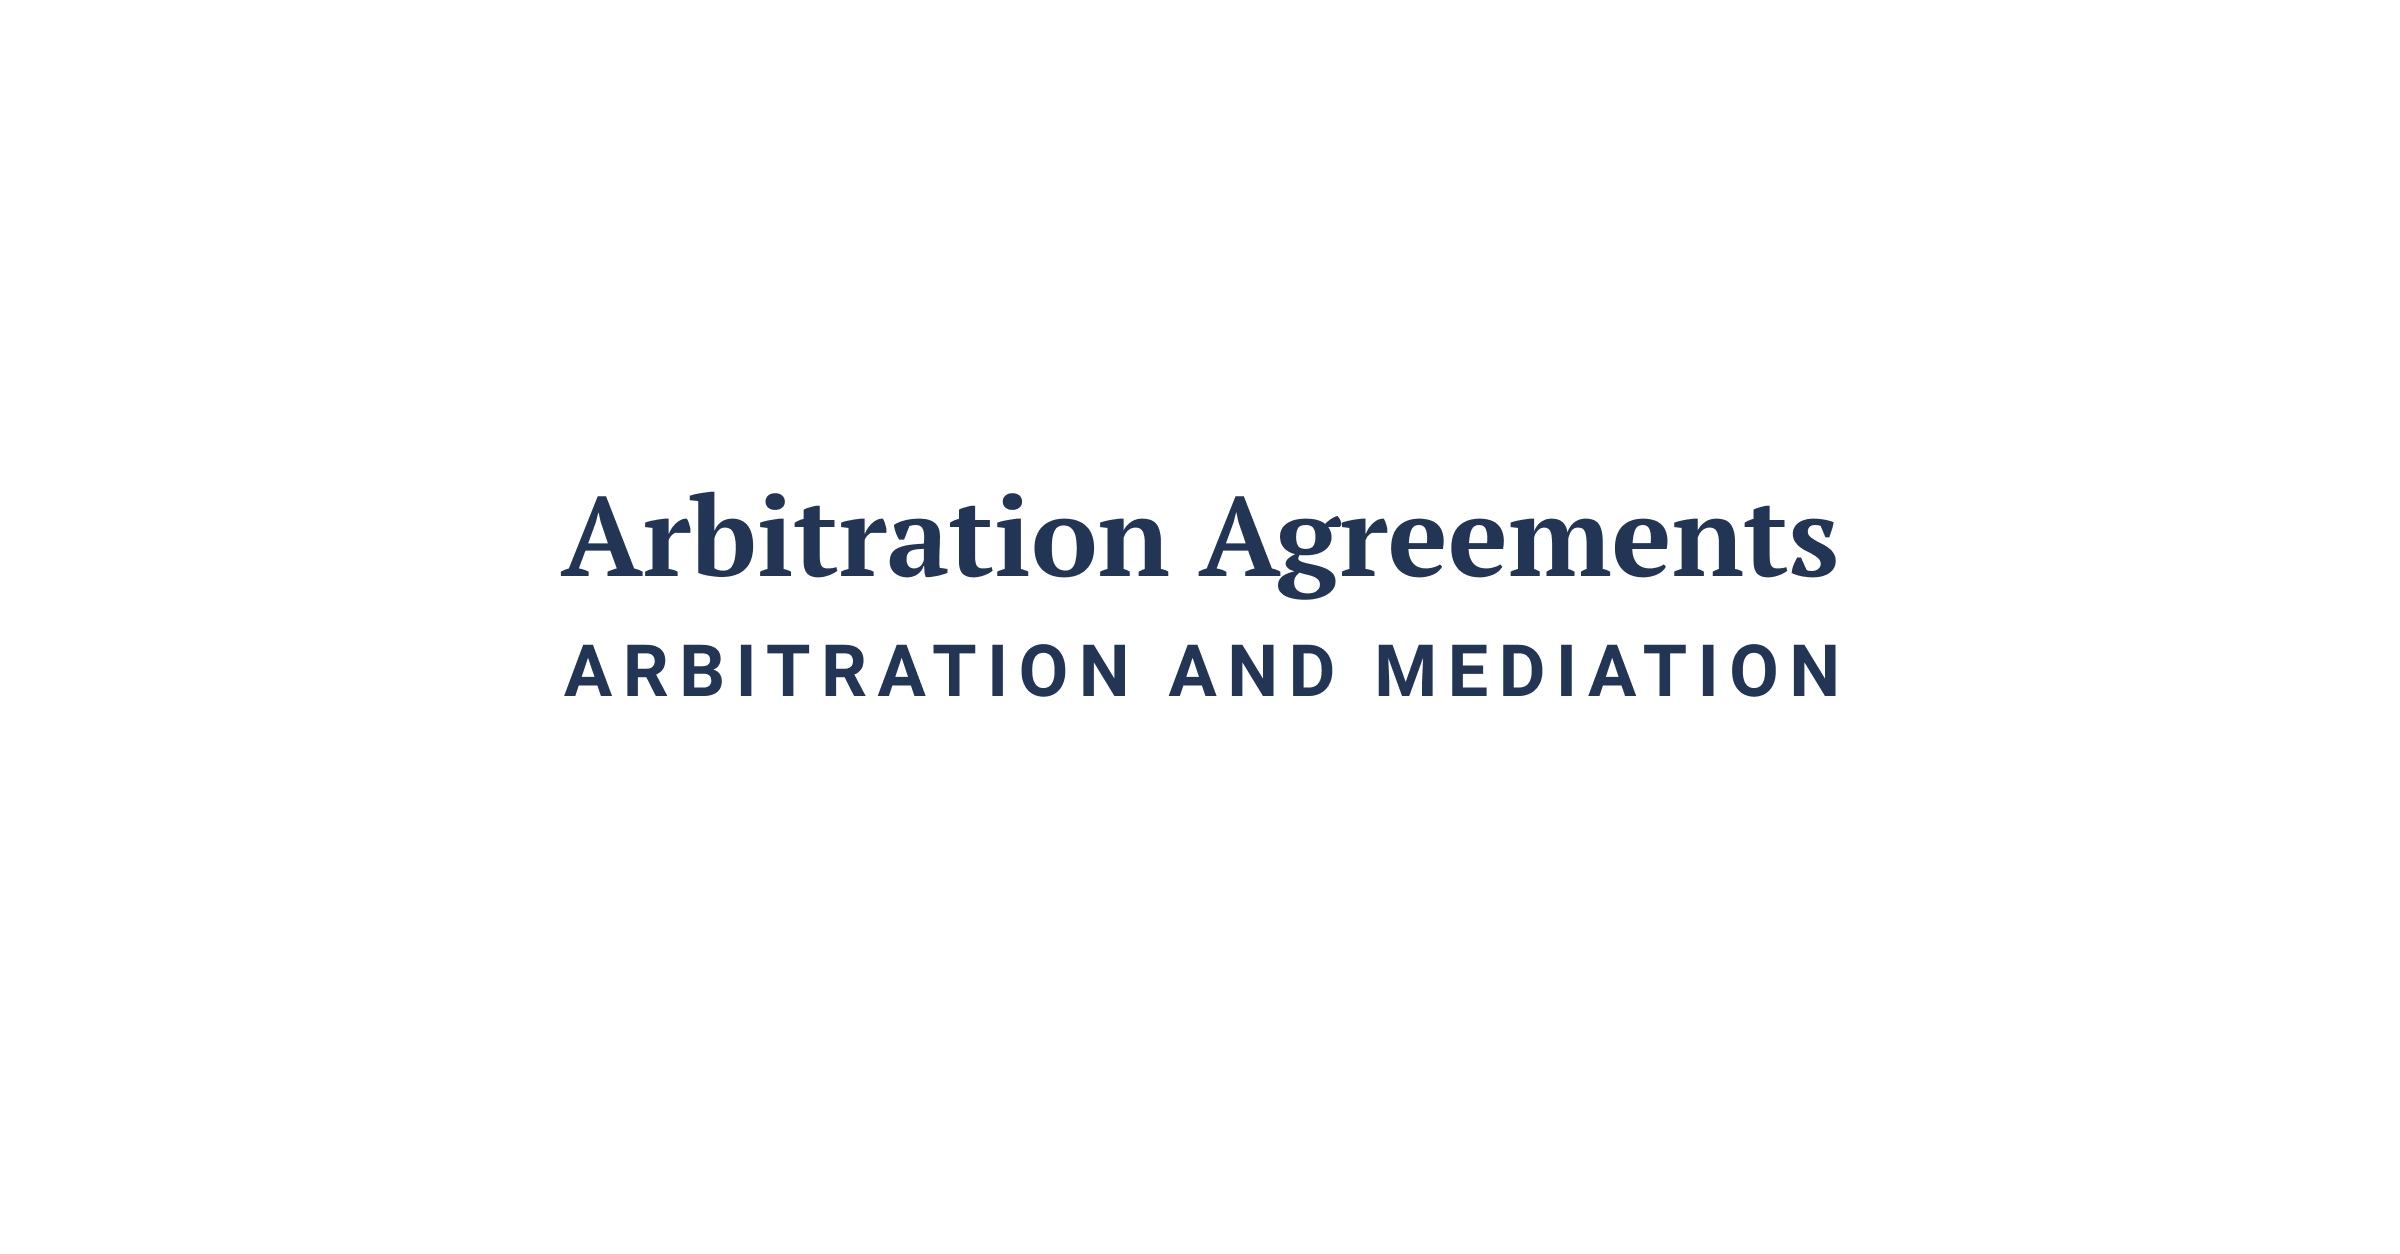 Arbitration Company product image reference 5